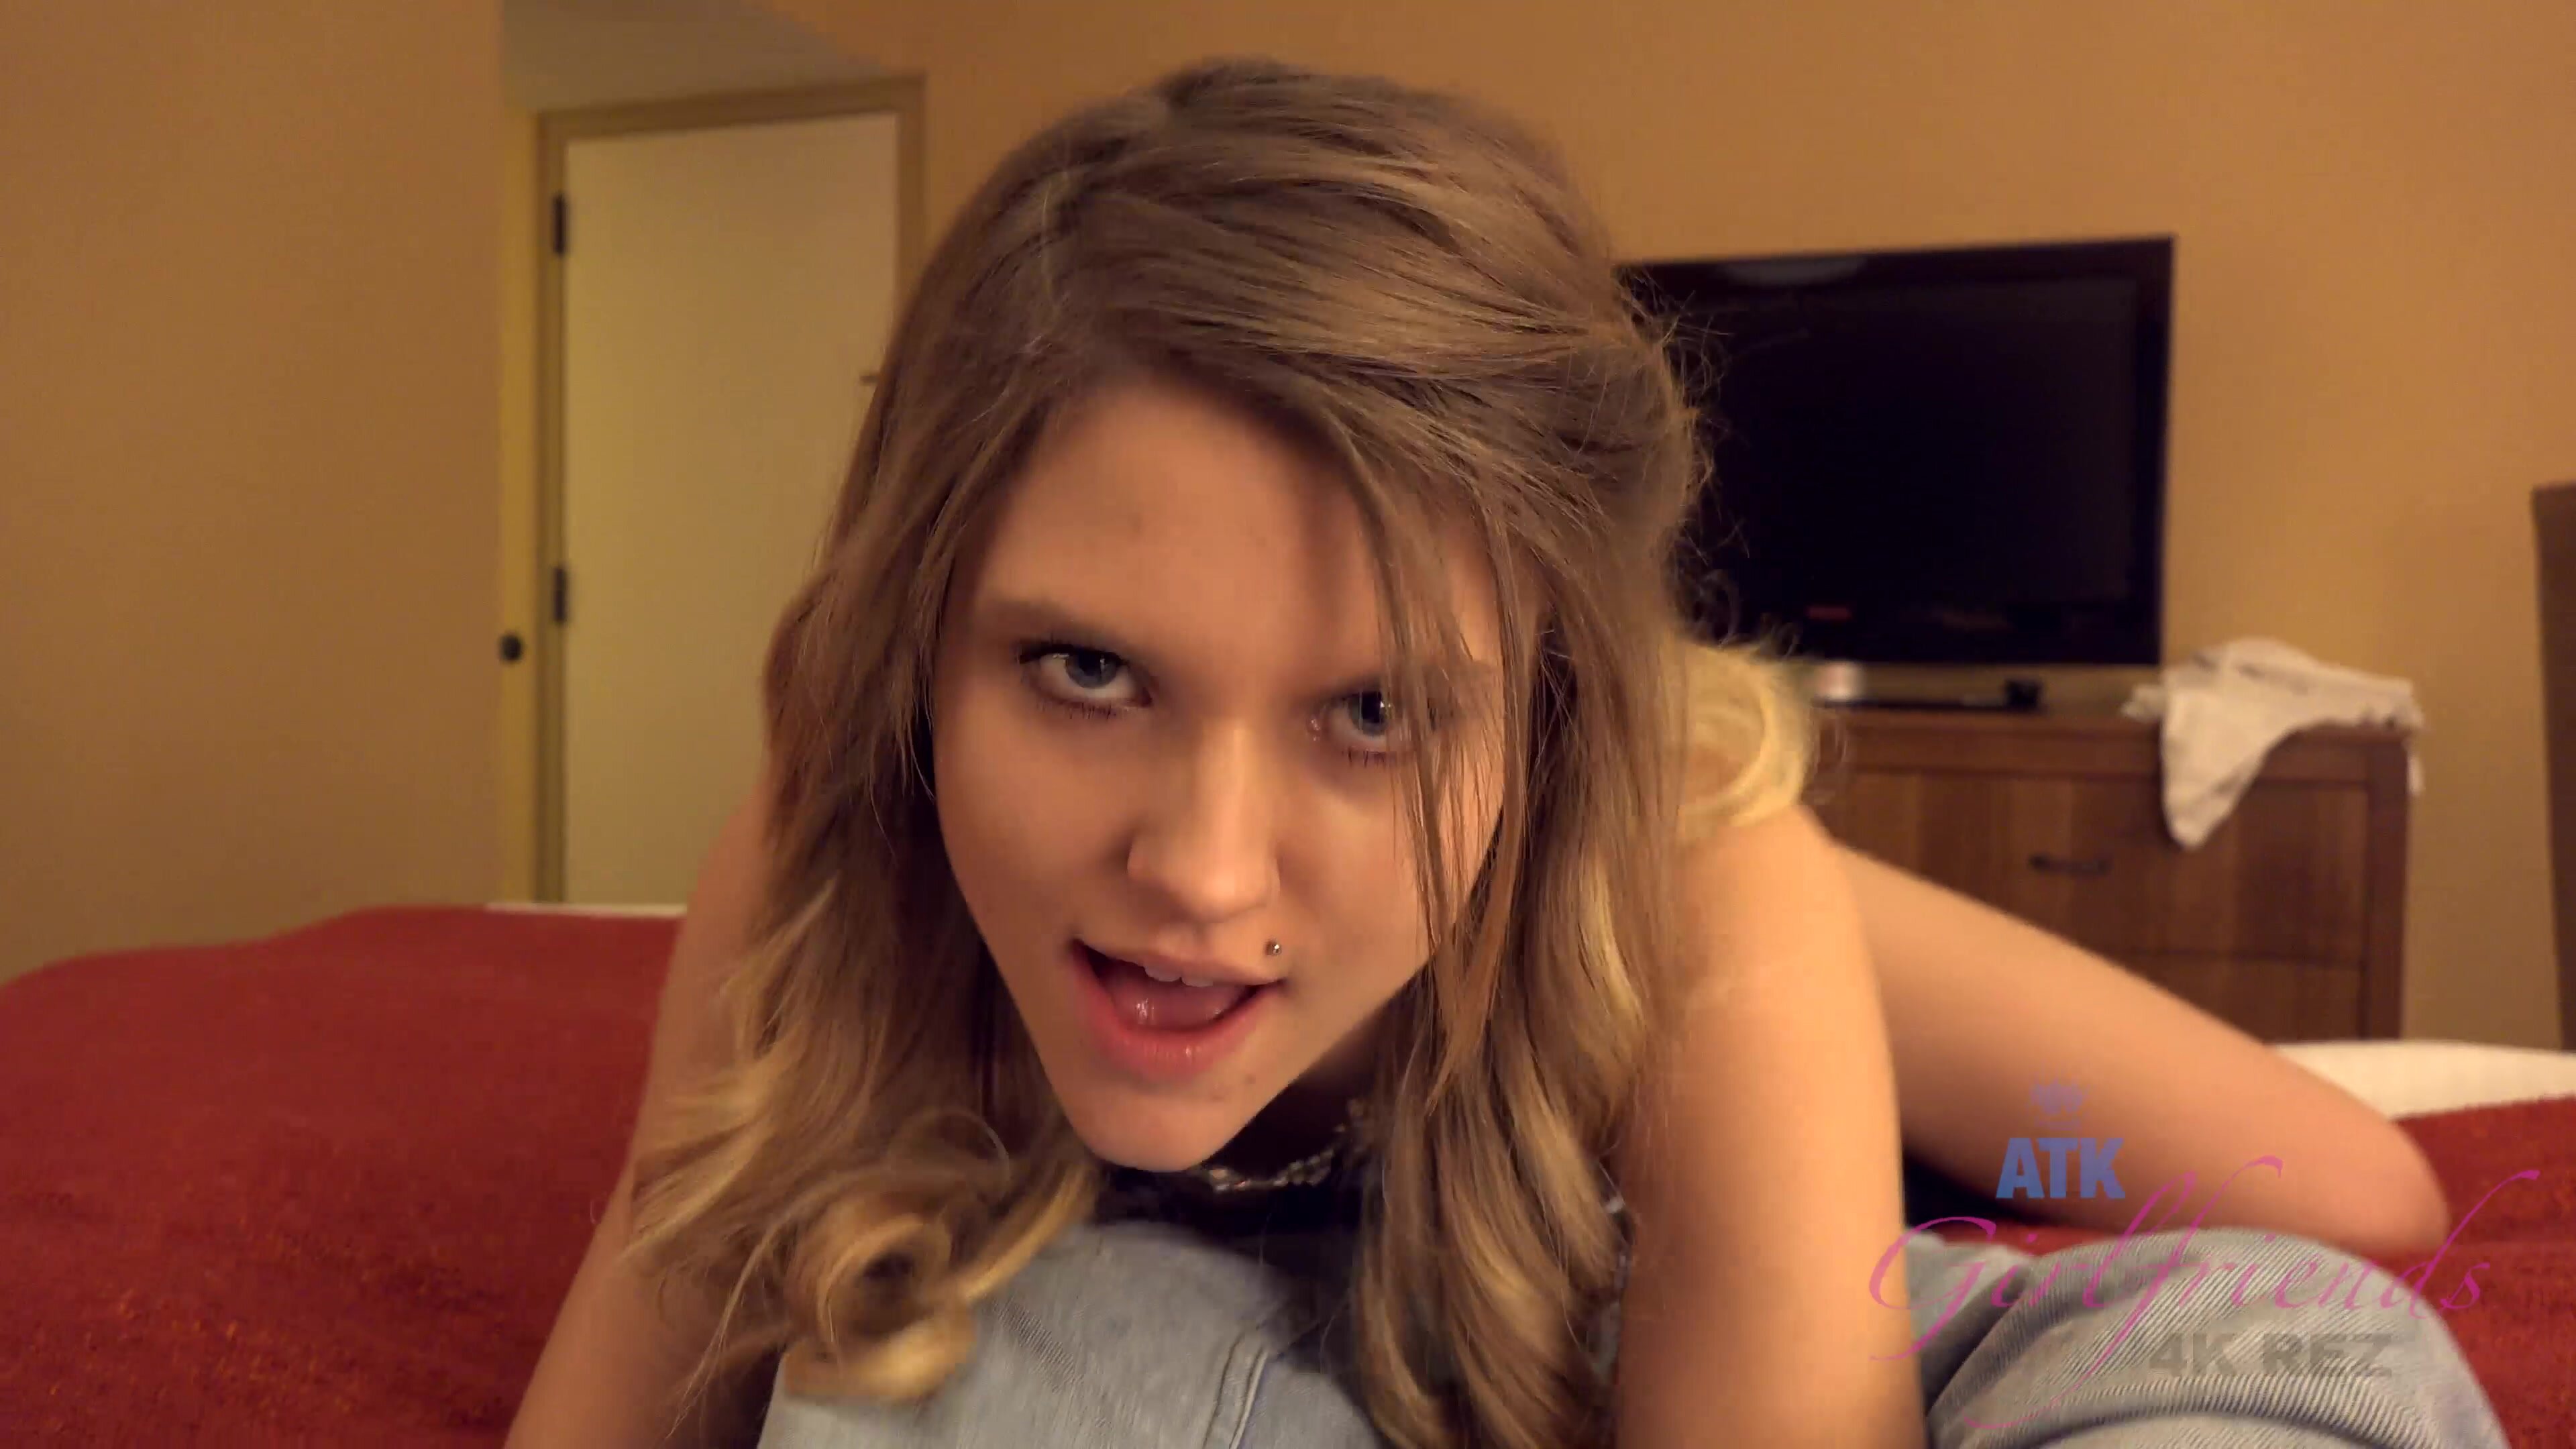 Scarlett Fever - You get to creampie a giantess after your dinner date